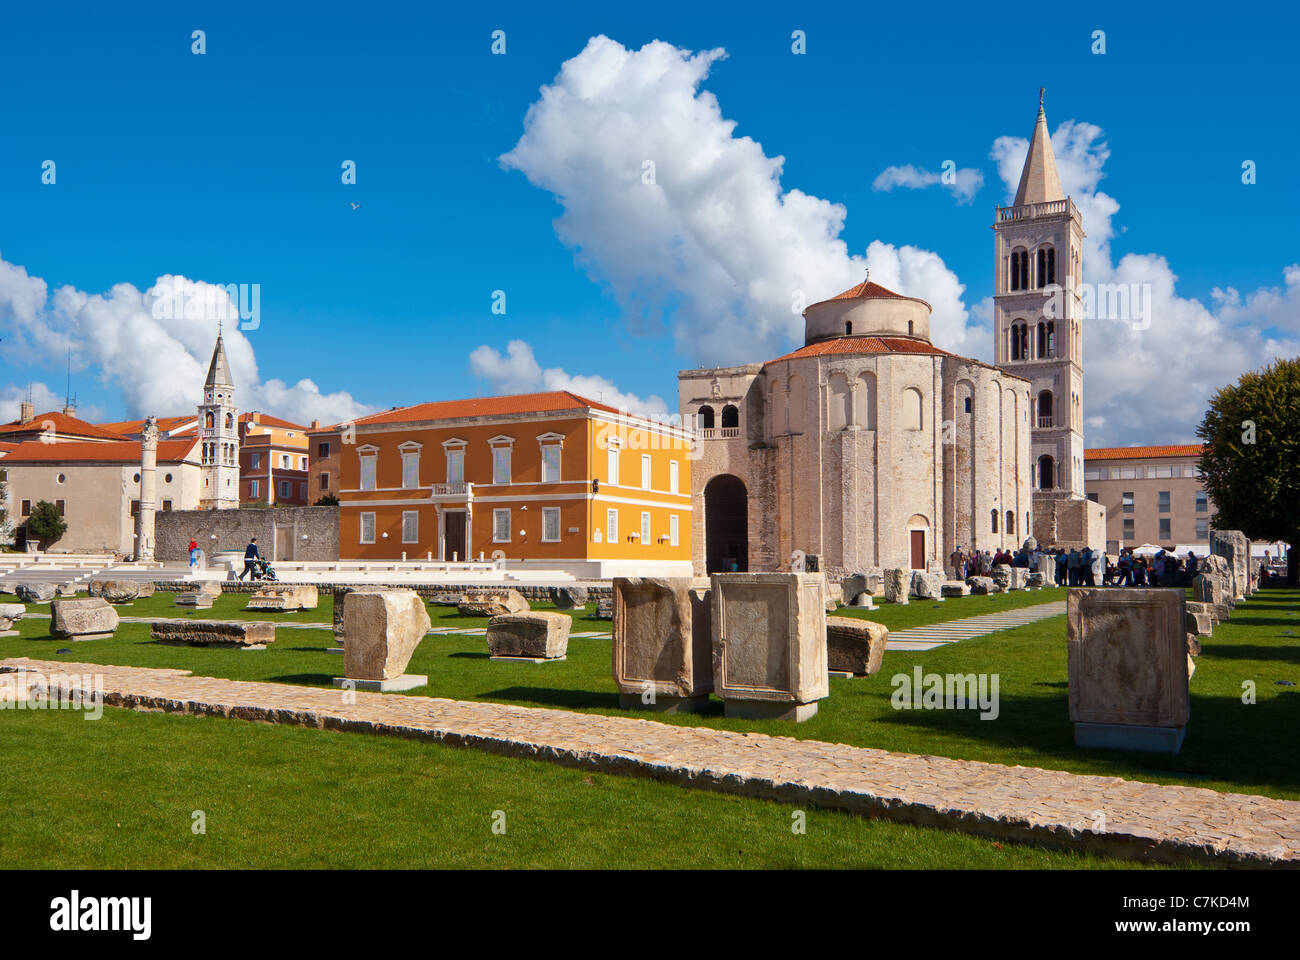 Center of Zadar, Croatia. Roman Forum with churche St. Donat and Cathedral of St. Anastasia Stock Photo